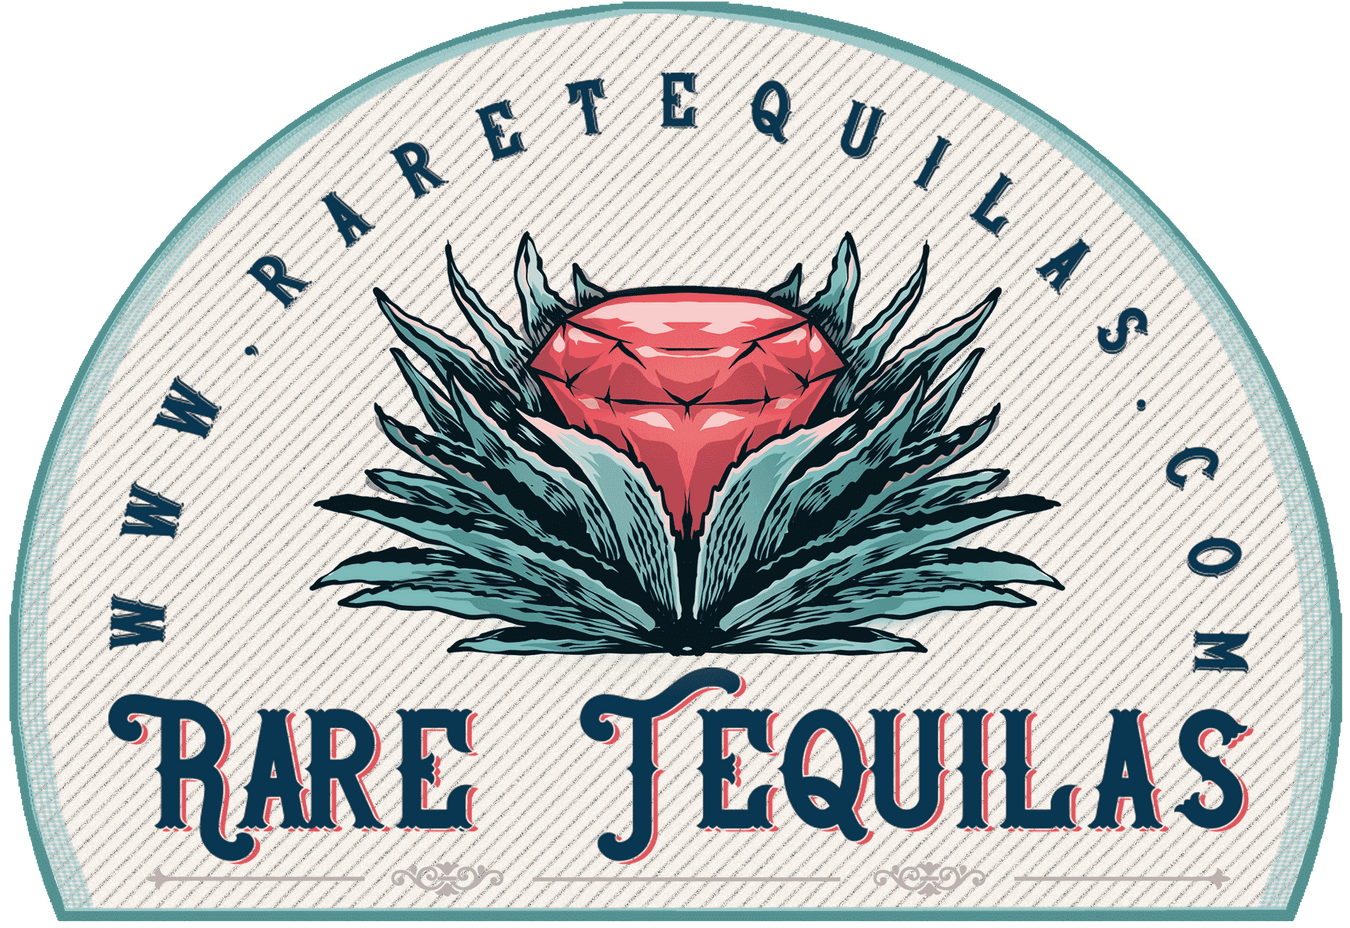 Buy rare tequila brands from Rare Tequilas.